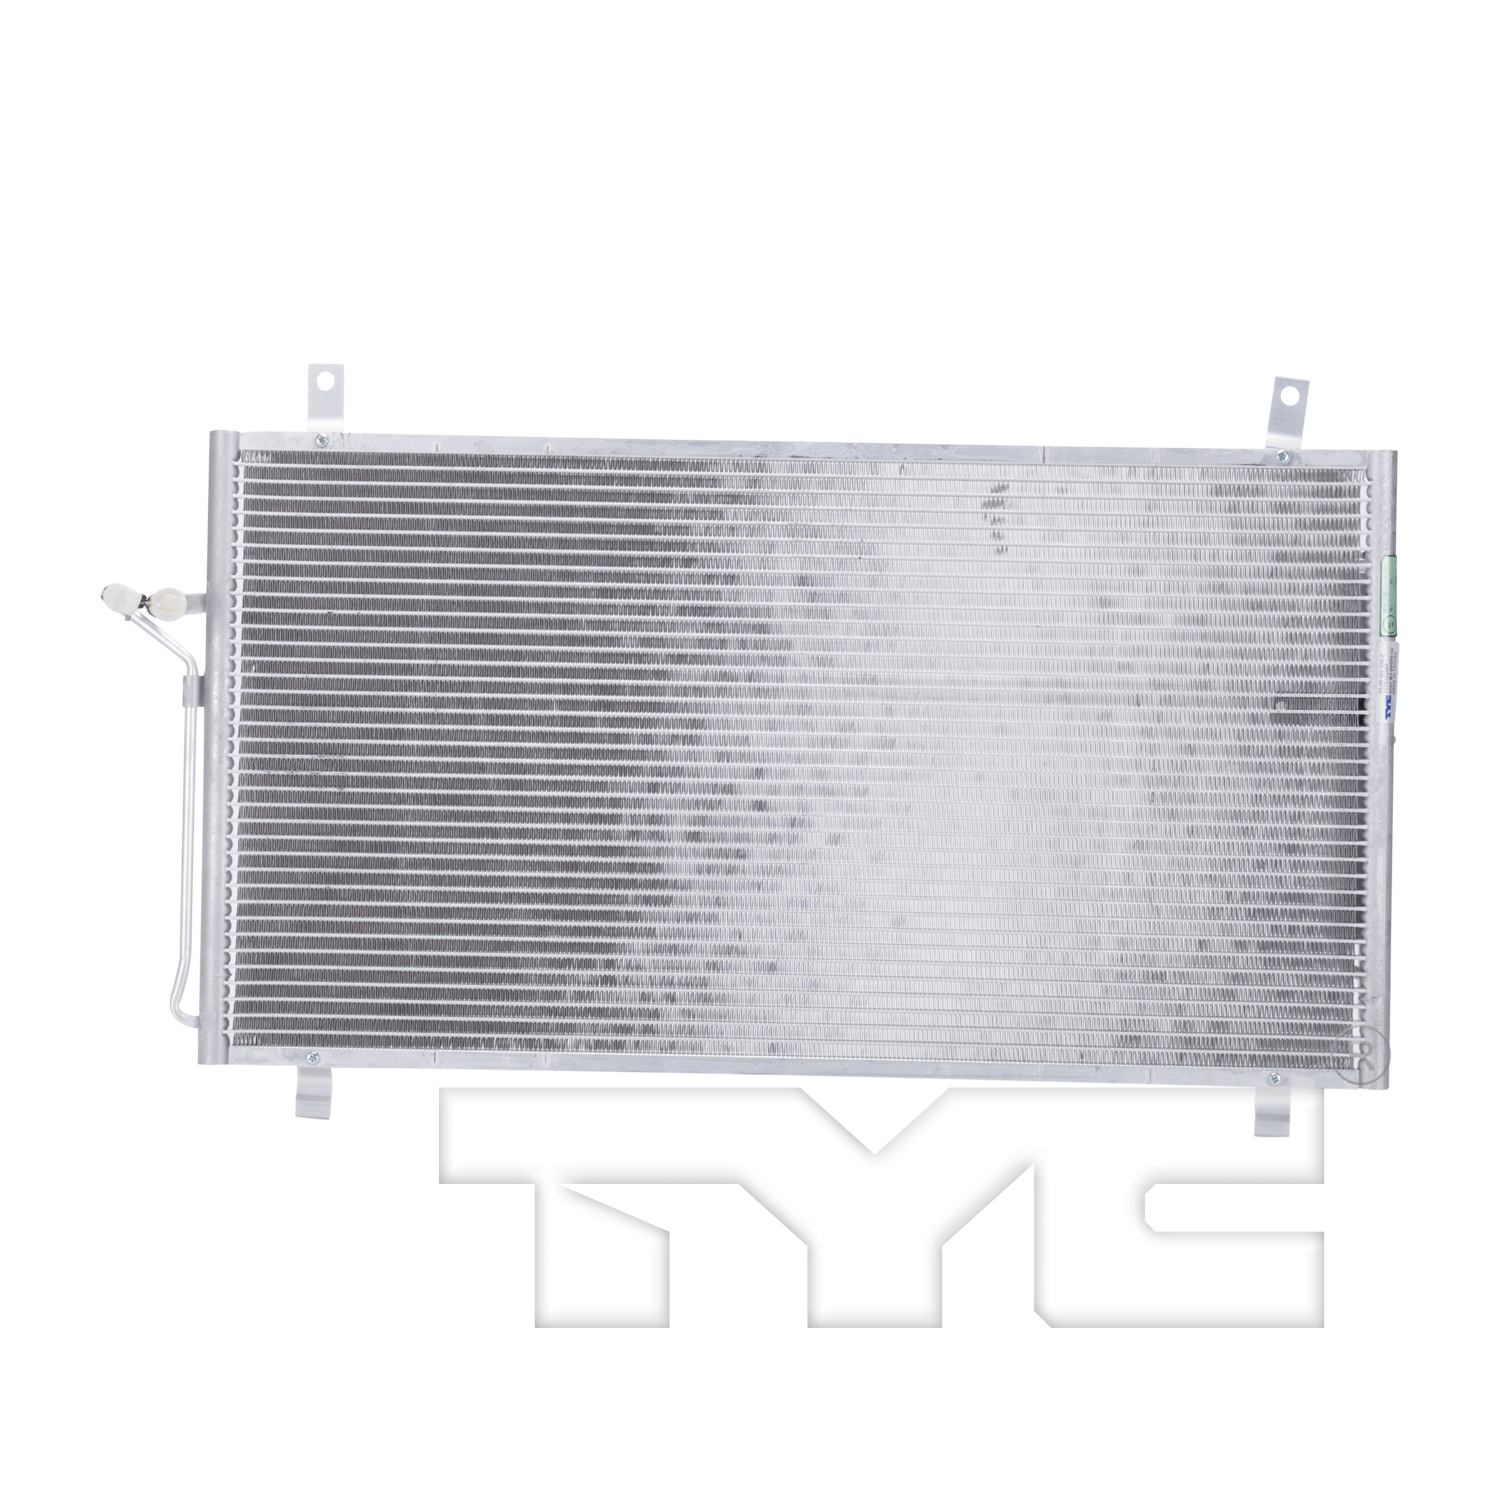 Aftermarket AC CONDENSERS for NISSAN - 350Z, 350Z,03-09,Air conditioning condenser